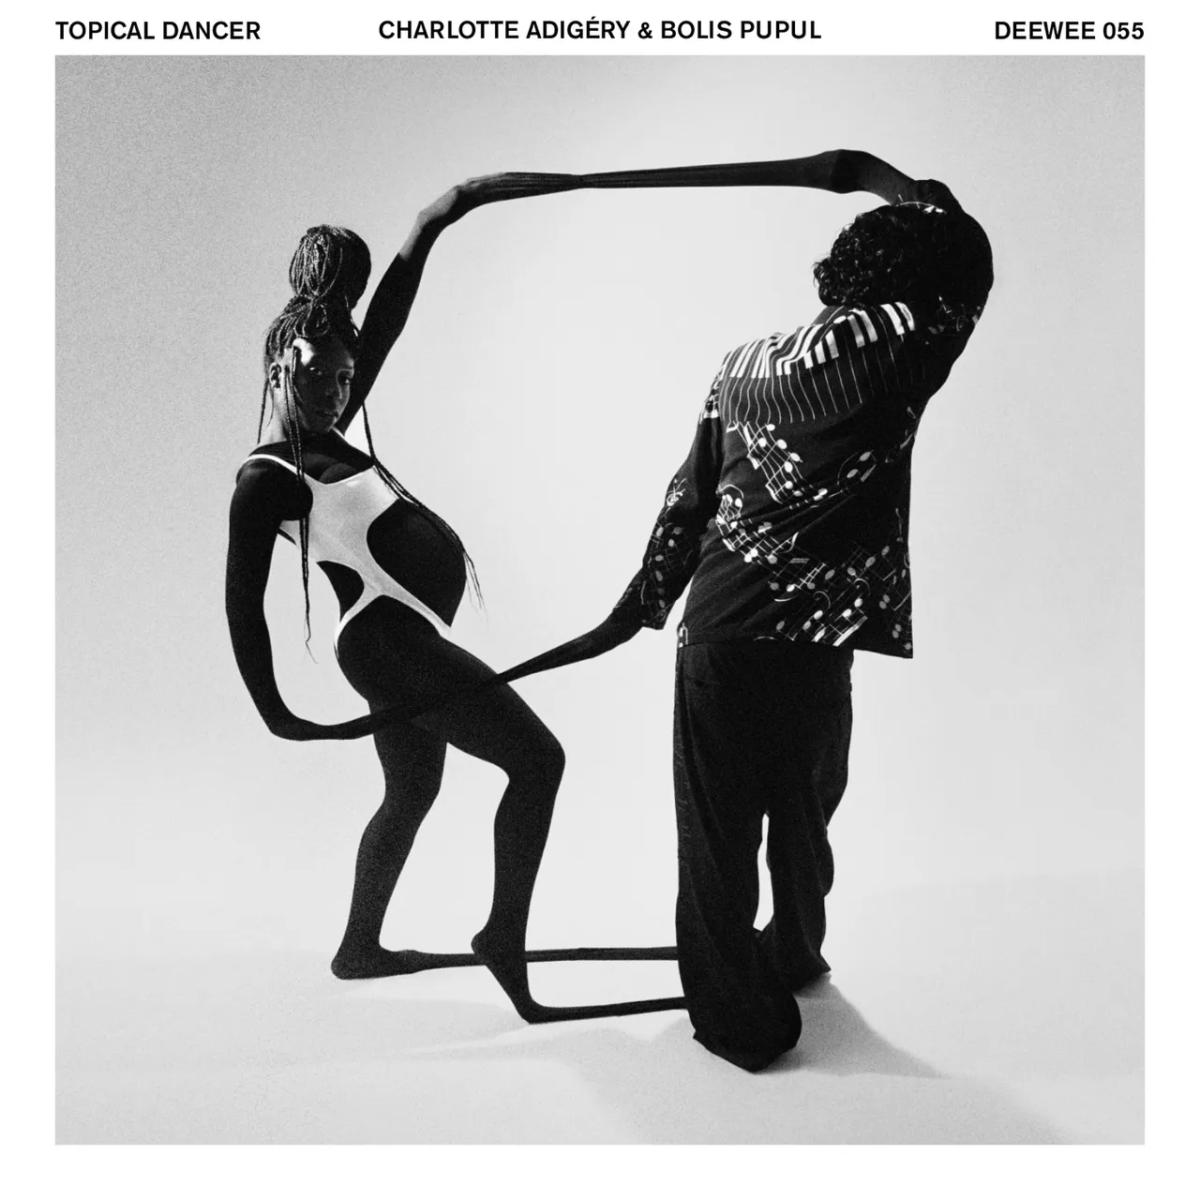 Album cover for "Topical Dancer." A black woman (left)and white man linking limbs and posed organically. Image in black and white.